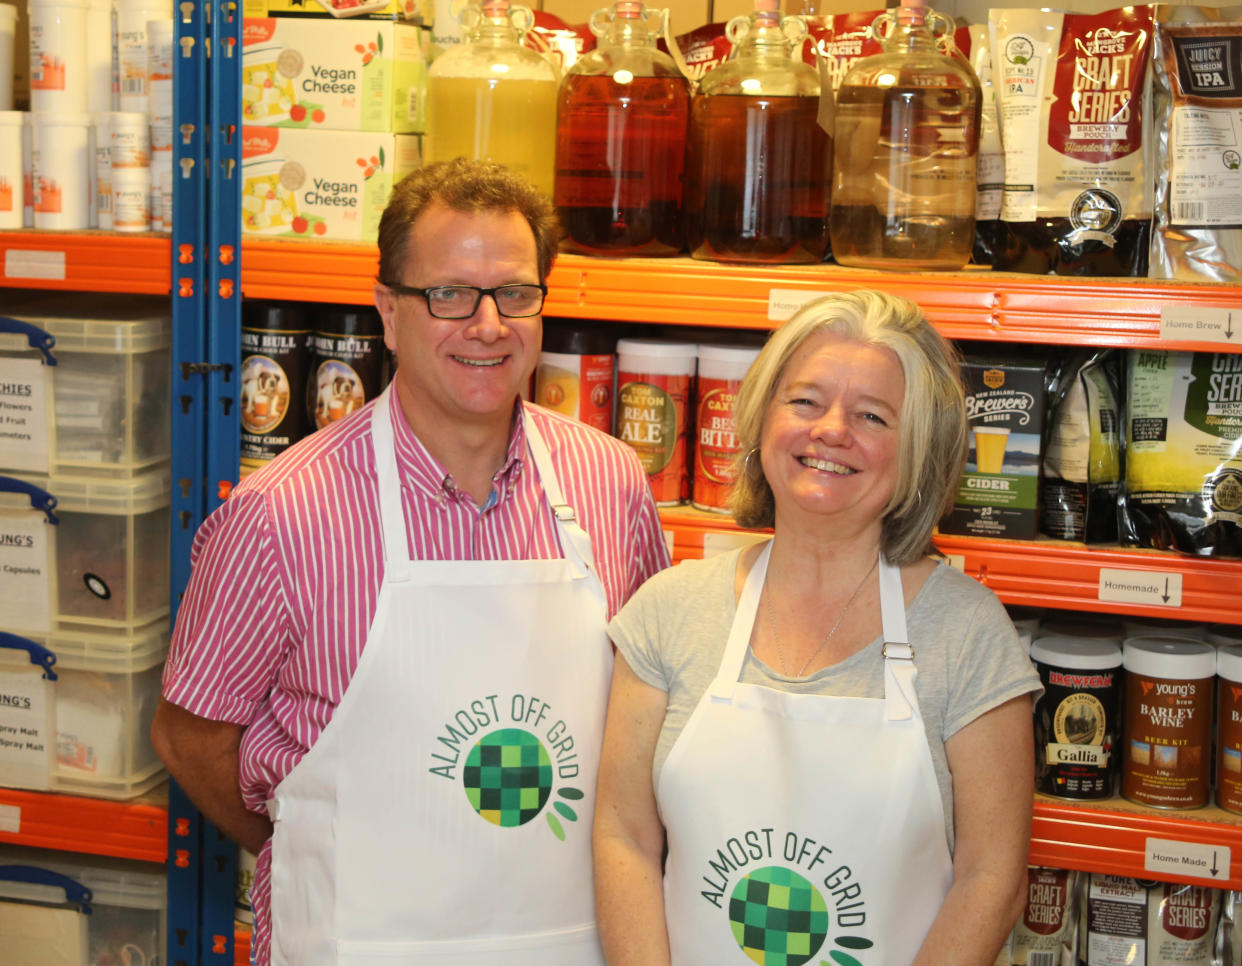 Bev and Andy Toogood run their small business Almost Off Grid in Sussex using almost entirely renewable energy